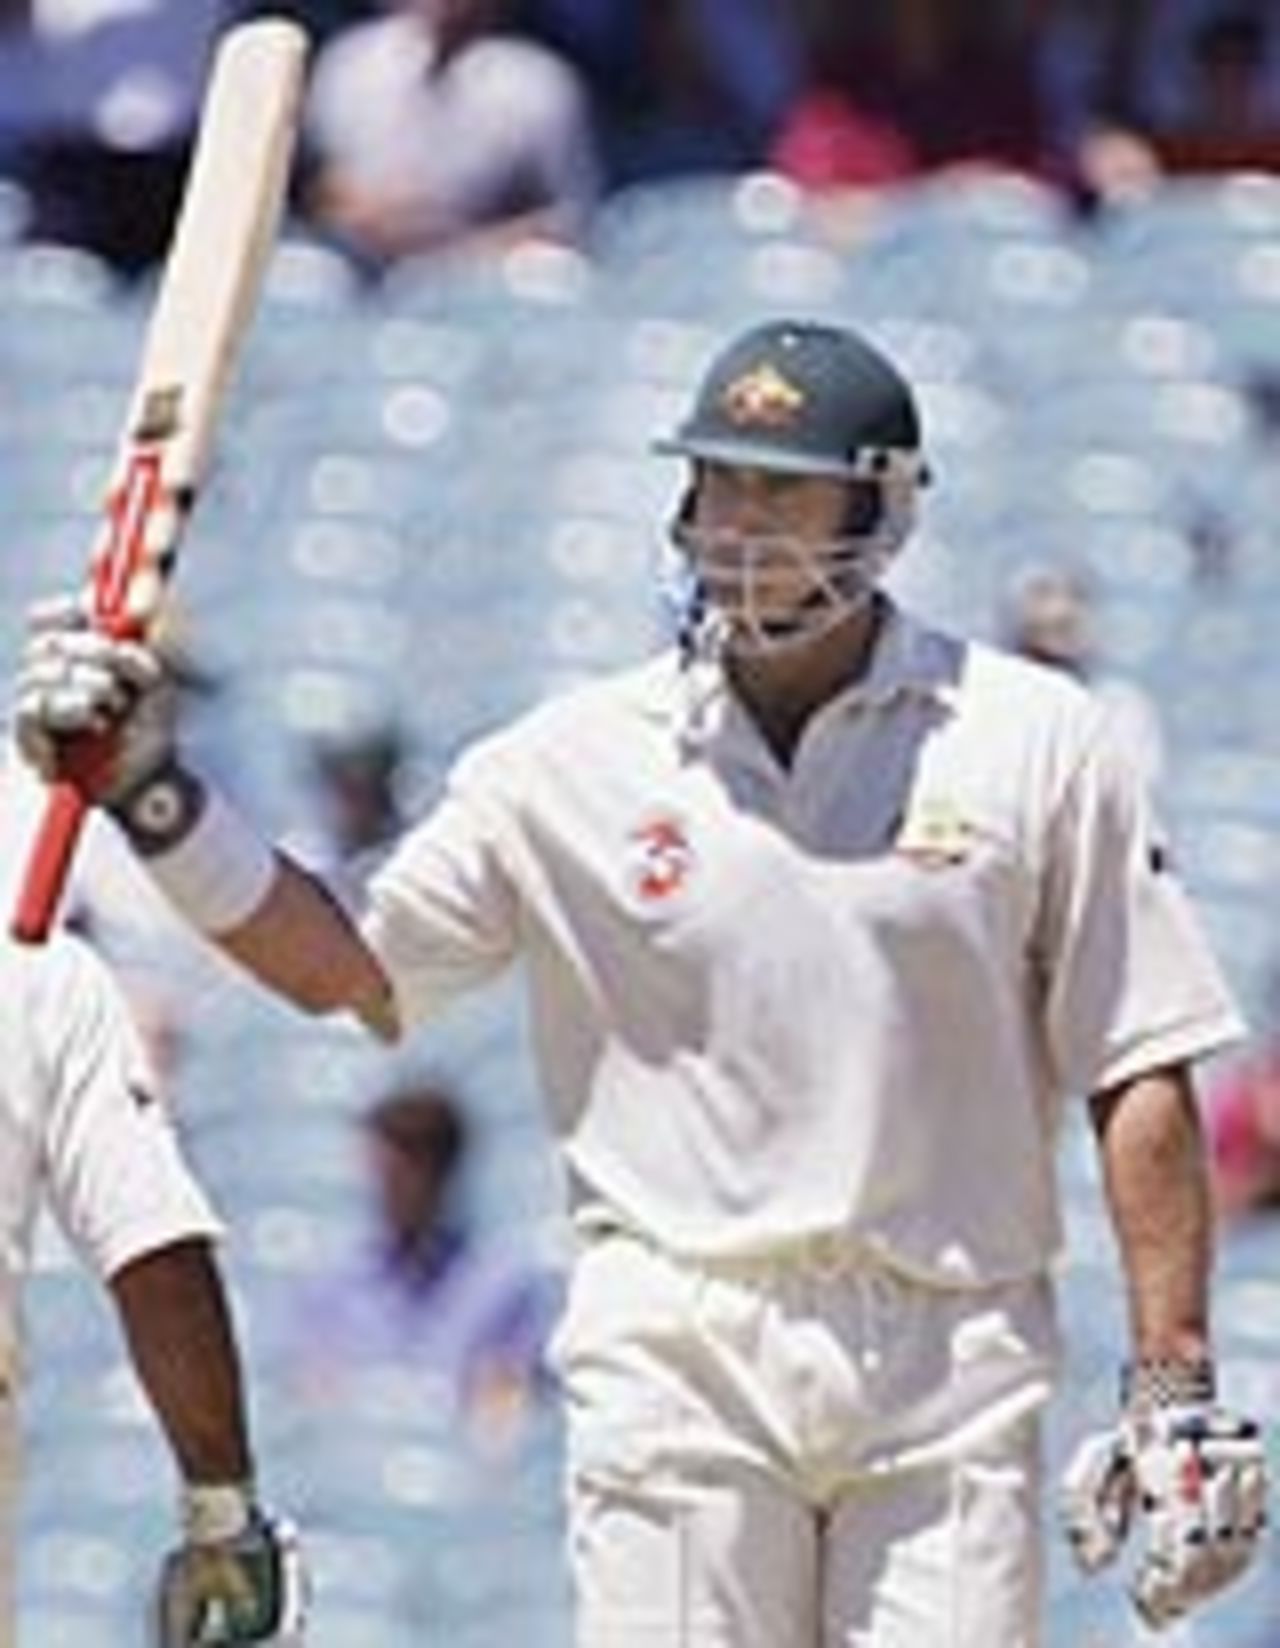 Matthew Hayden acknowledges the applause after scoring a fifty, Australia v India, 3rd Test, Melbourne, 5th day, December 30, 2003